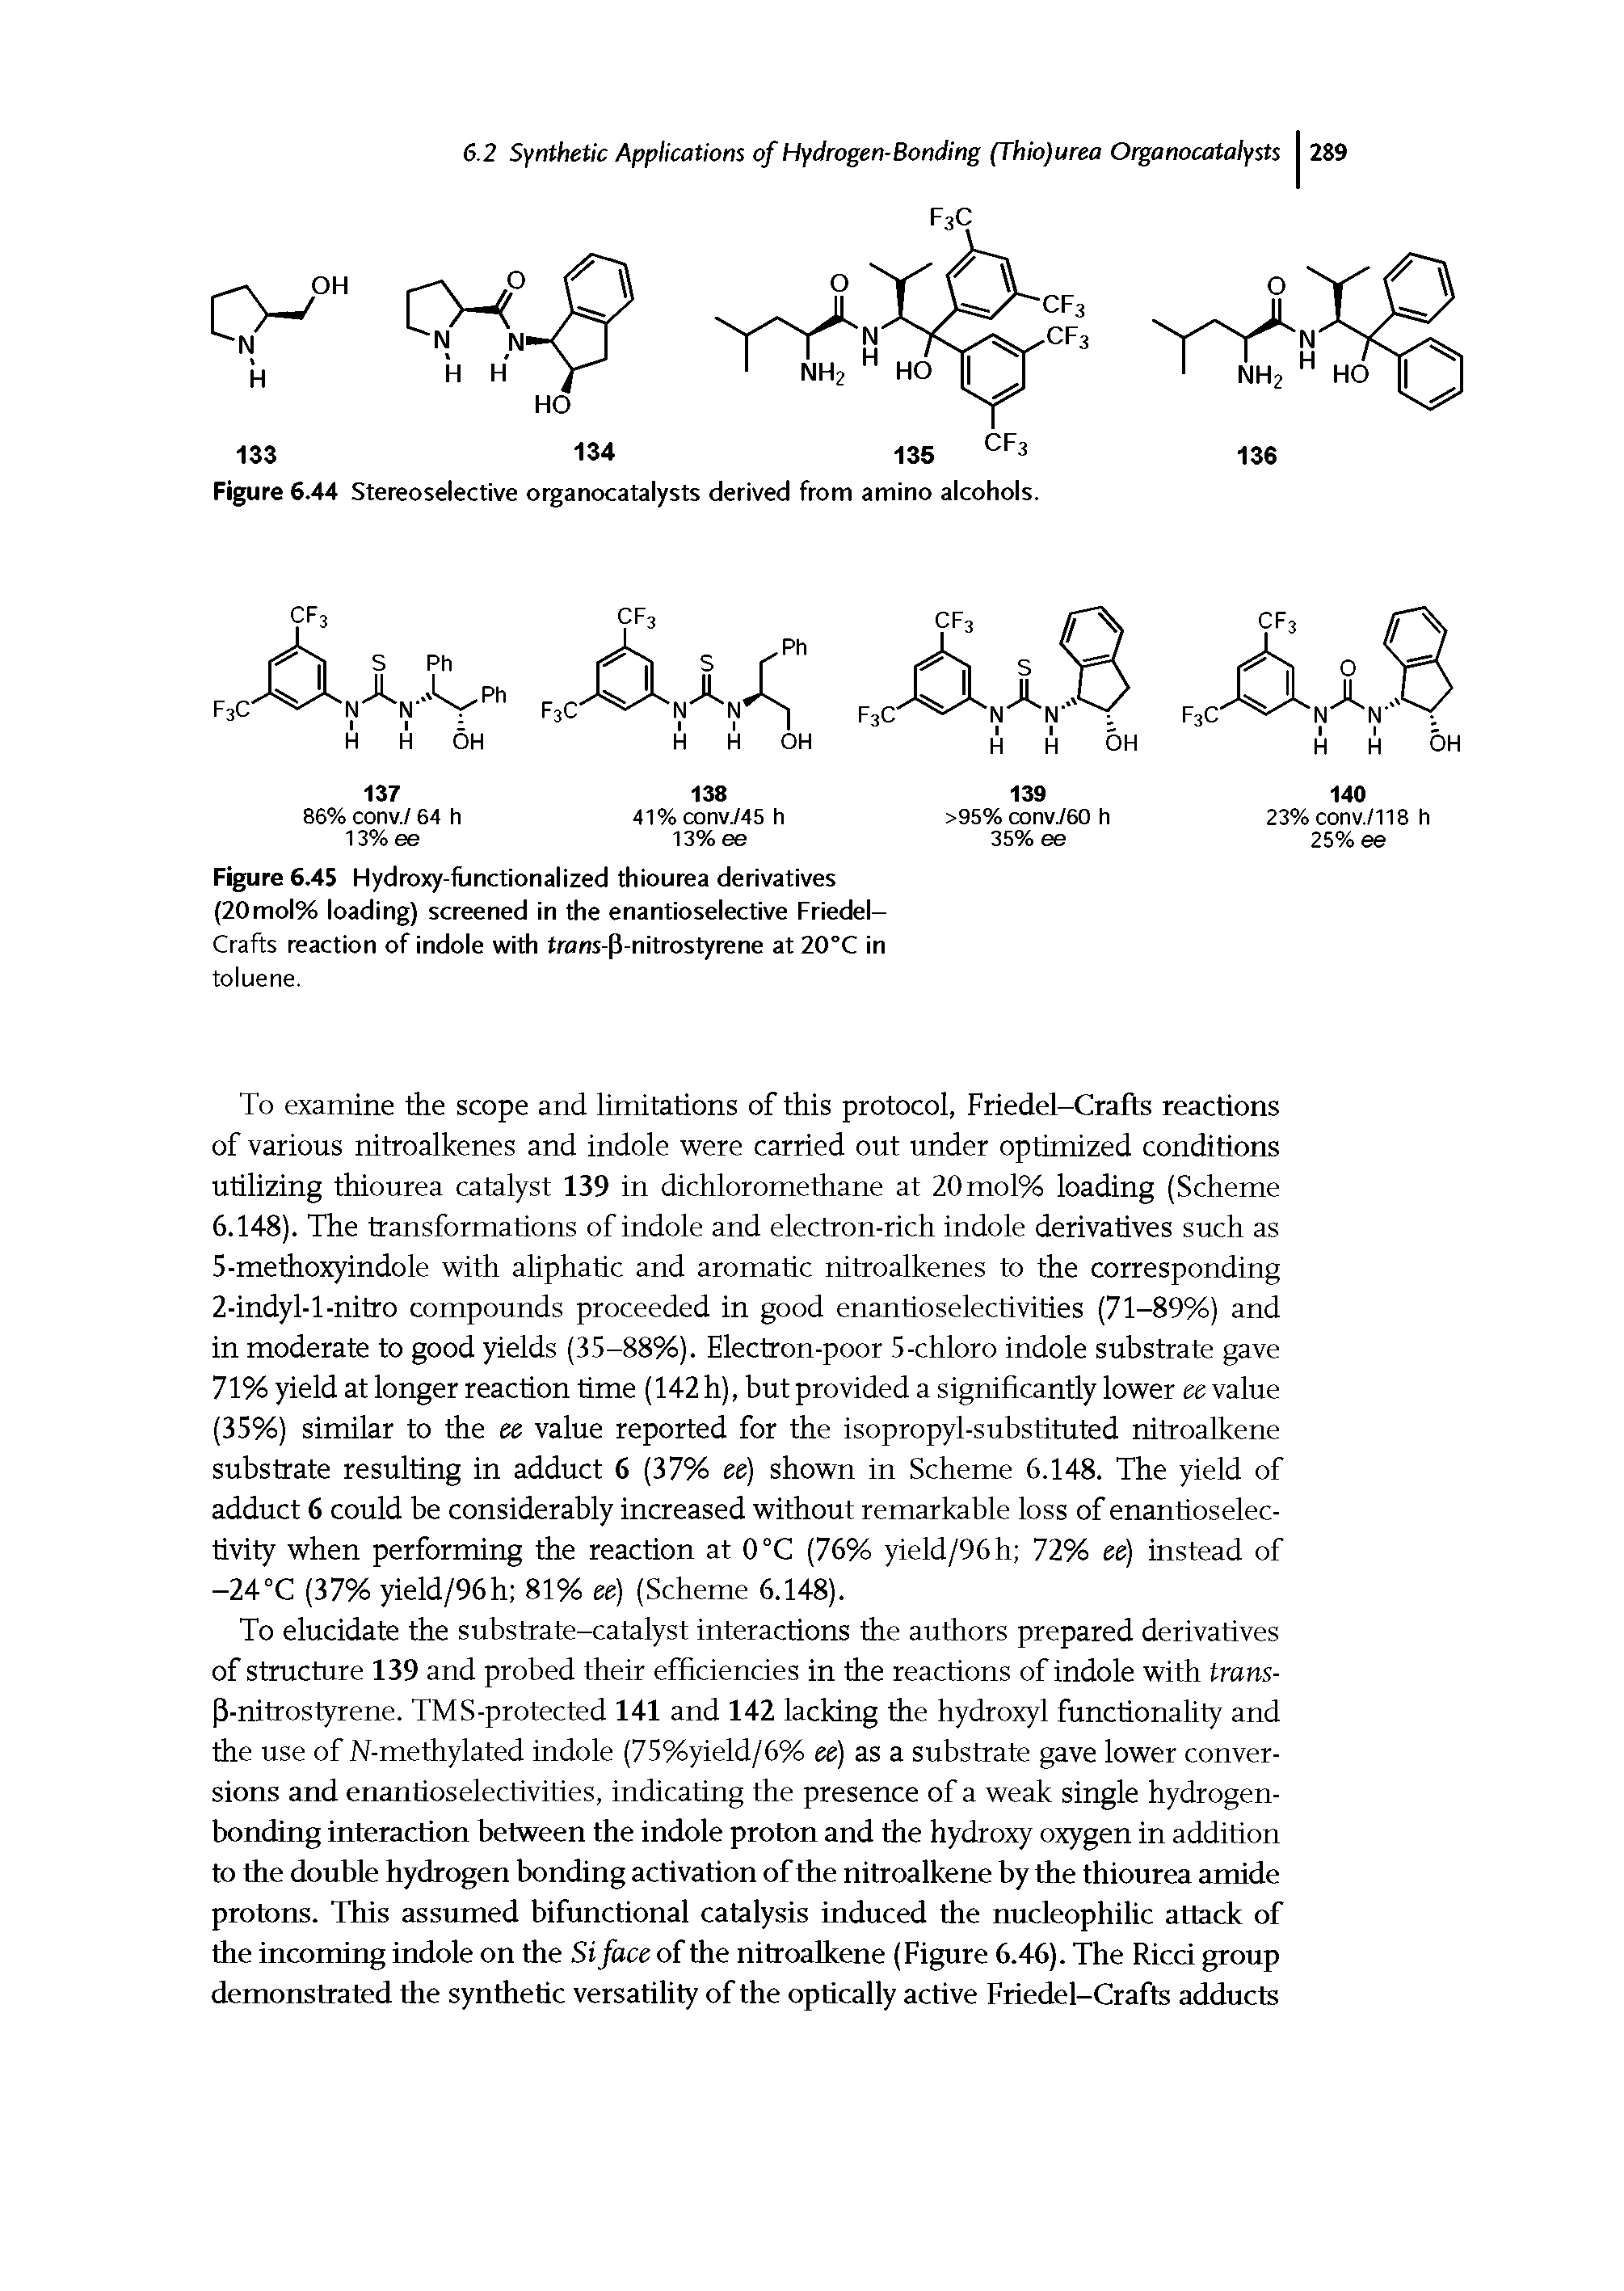 Figure 6.45 Hydroxy-flinctionalized thiourea derivatives (20mol% loading) screened in the enantioselective Friedel-Crafts reaction of indole with trons-P-nitrostyrene at 20°C in toluene.